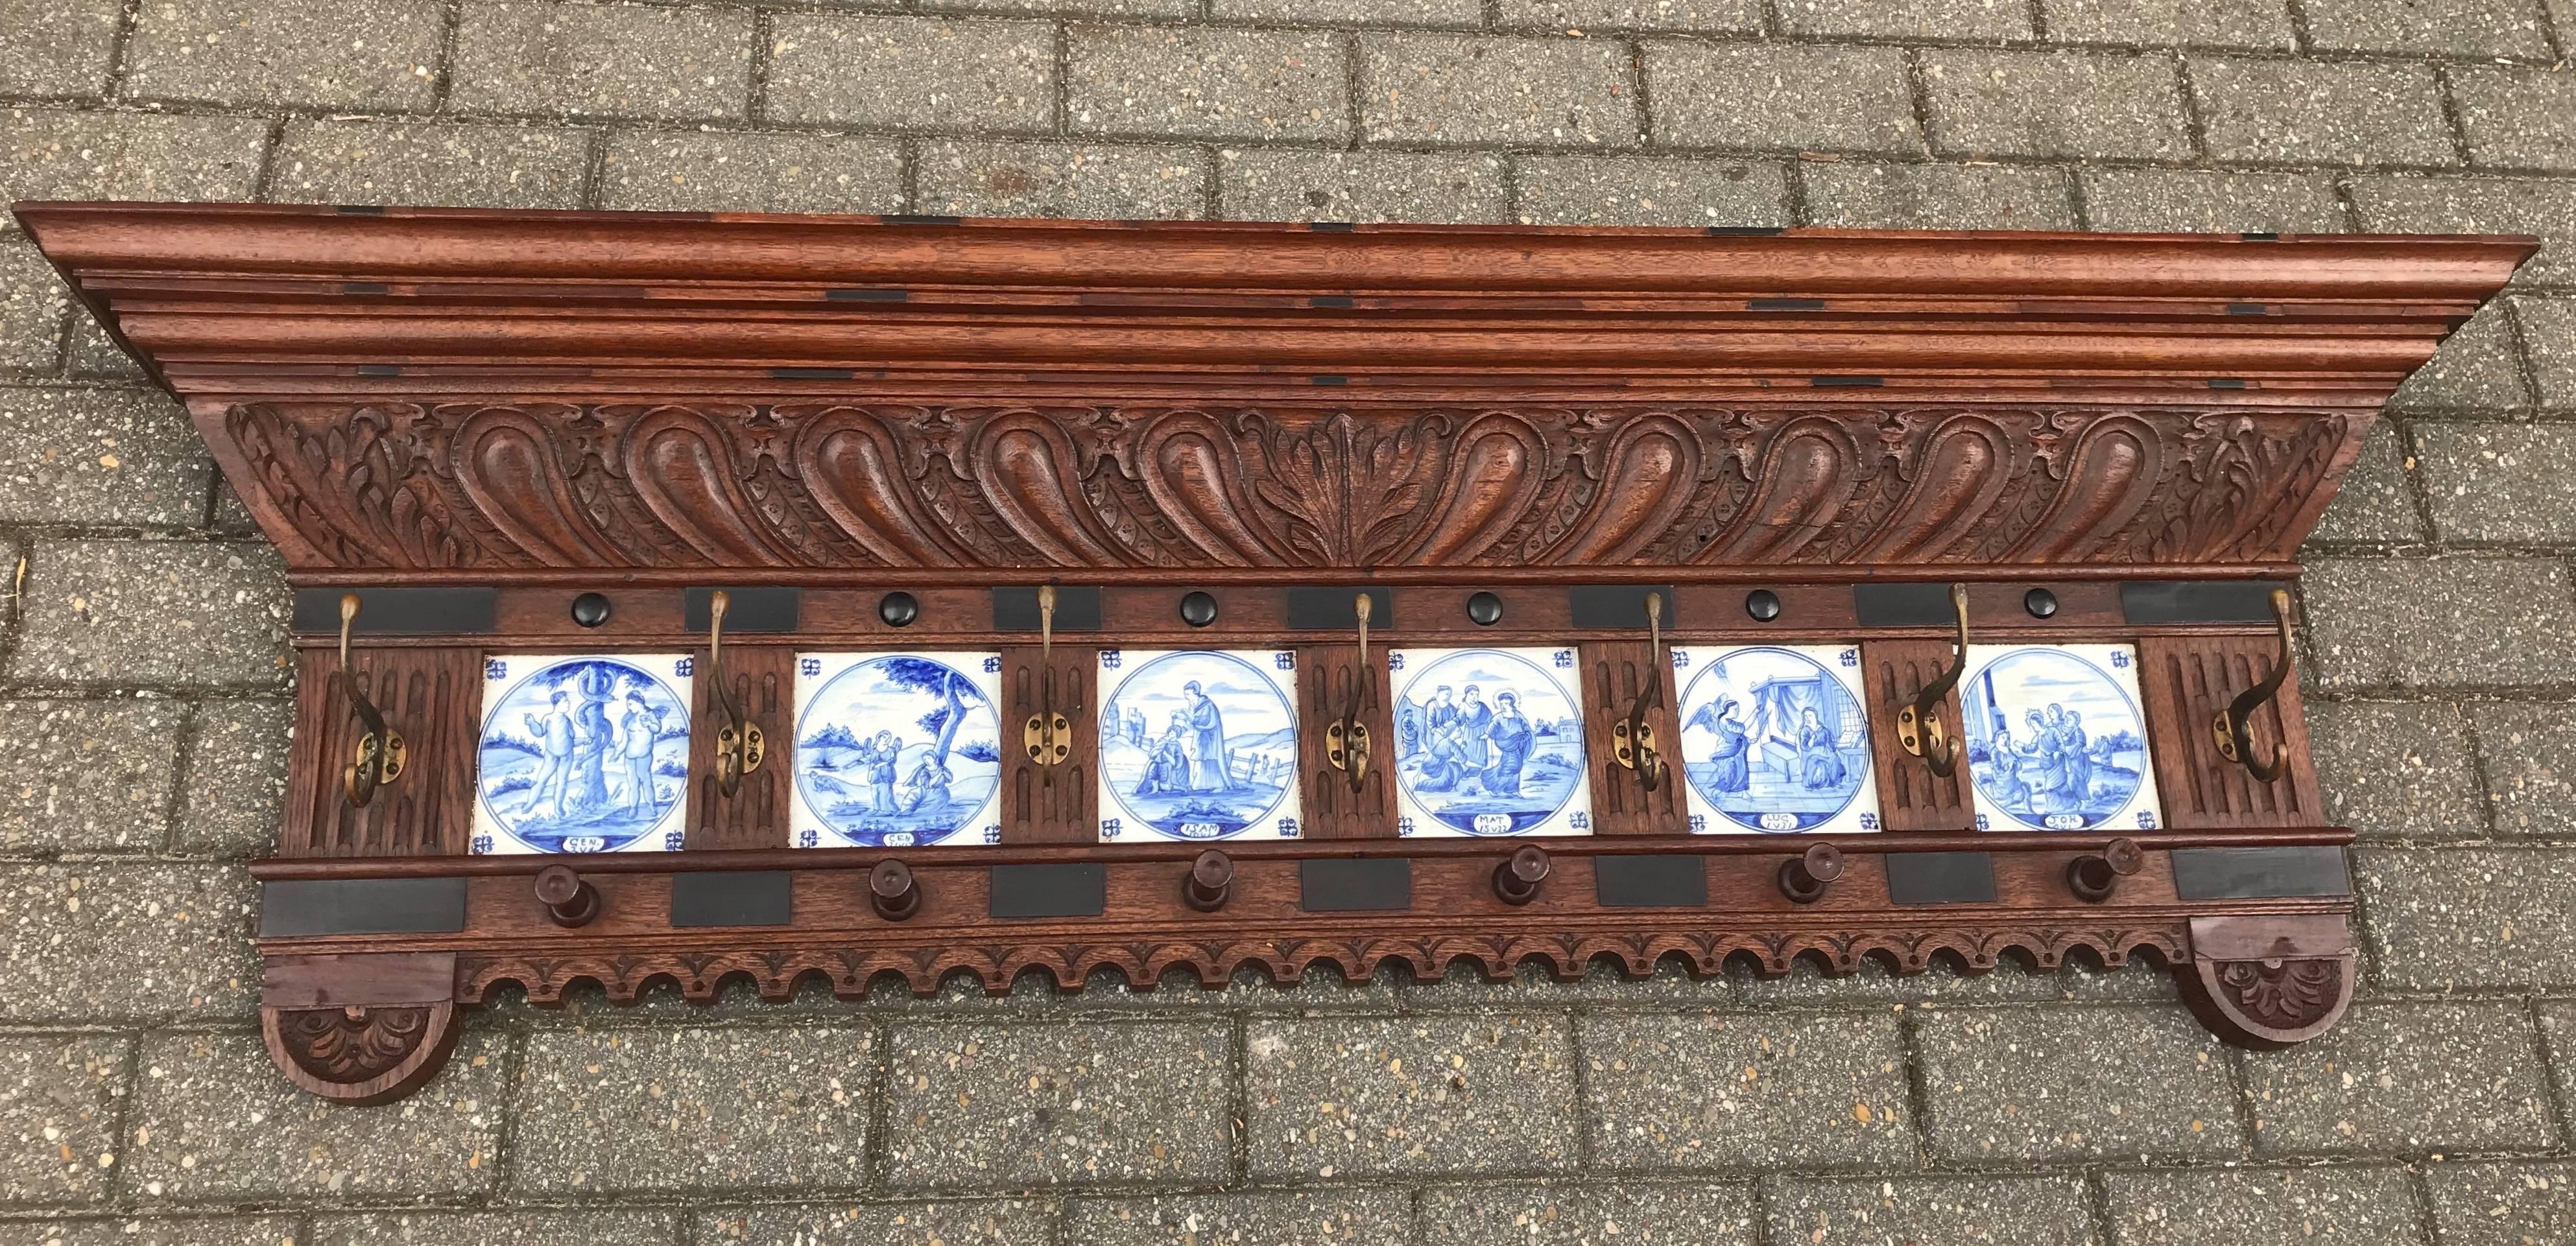 Impressive and all-handcrafted wall coat rack with six delftware tiles.  

If you are a collector of rare antiques and religious art referring to the holy bible then this early 19th century, Renaissance Revival wall coat rack could be perfect for